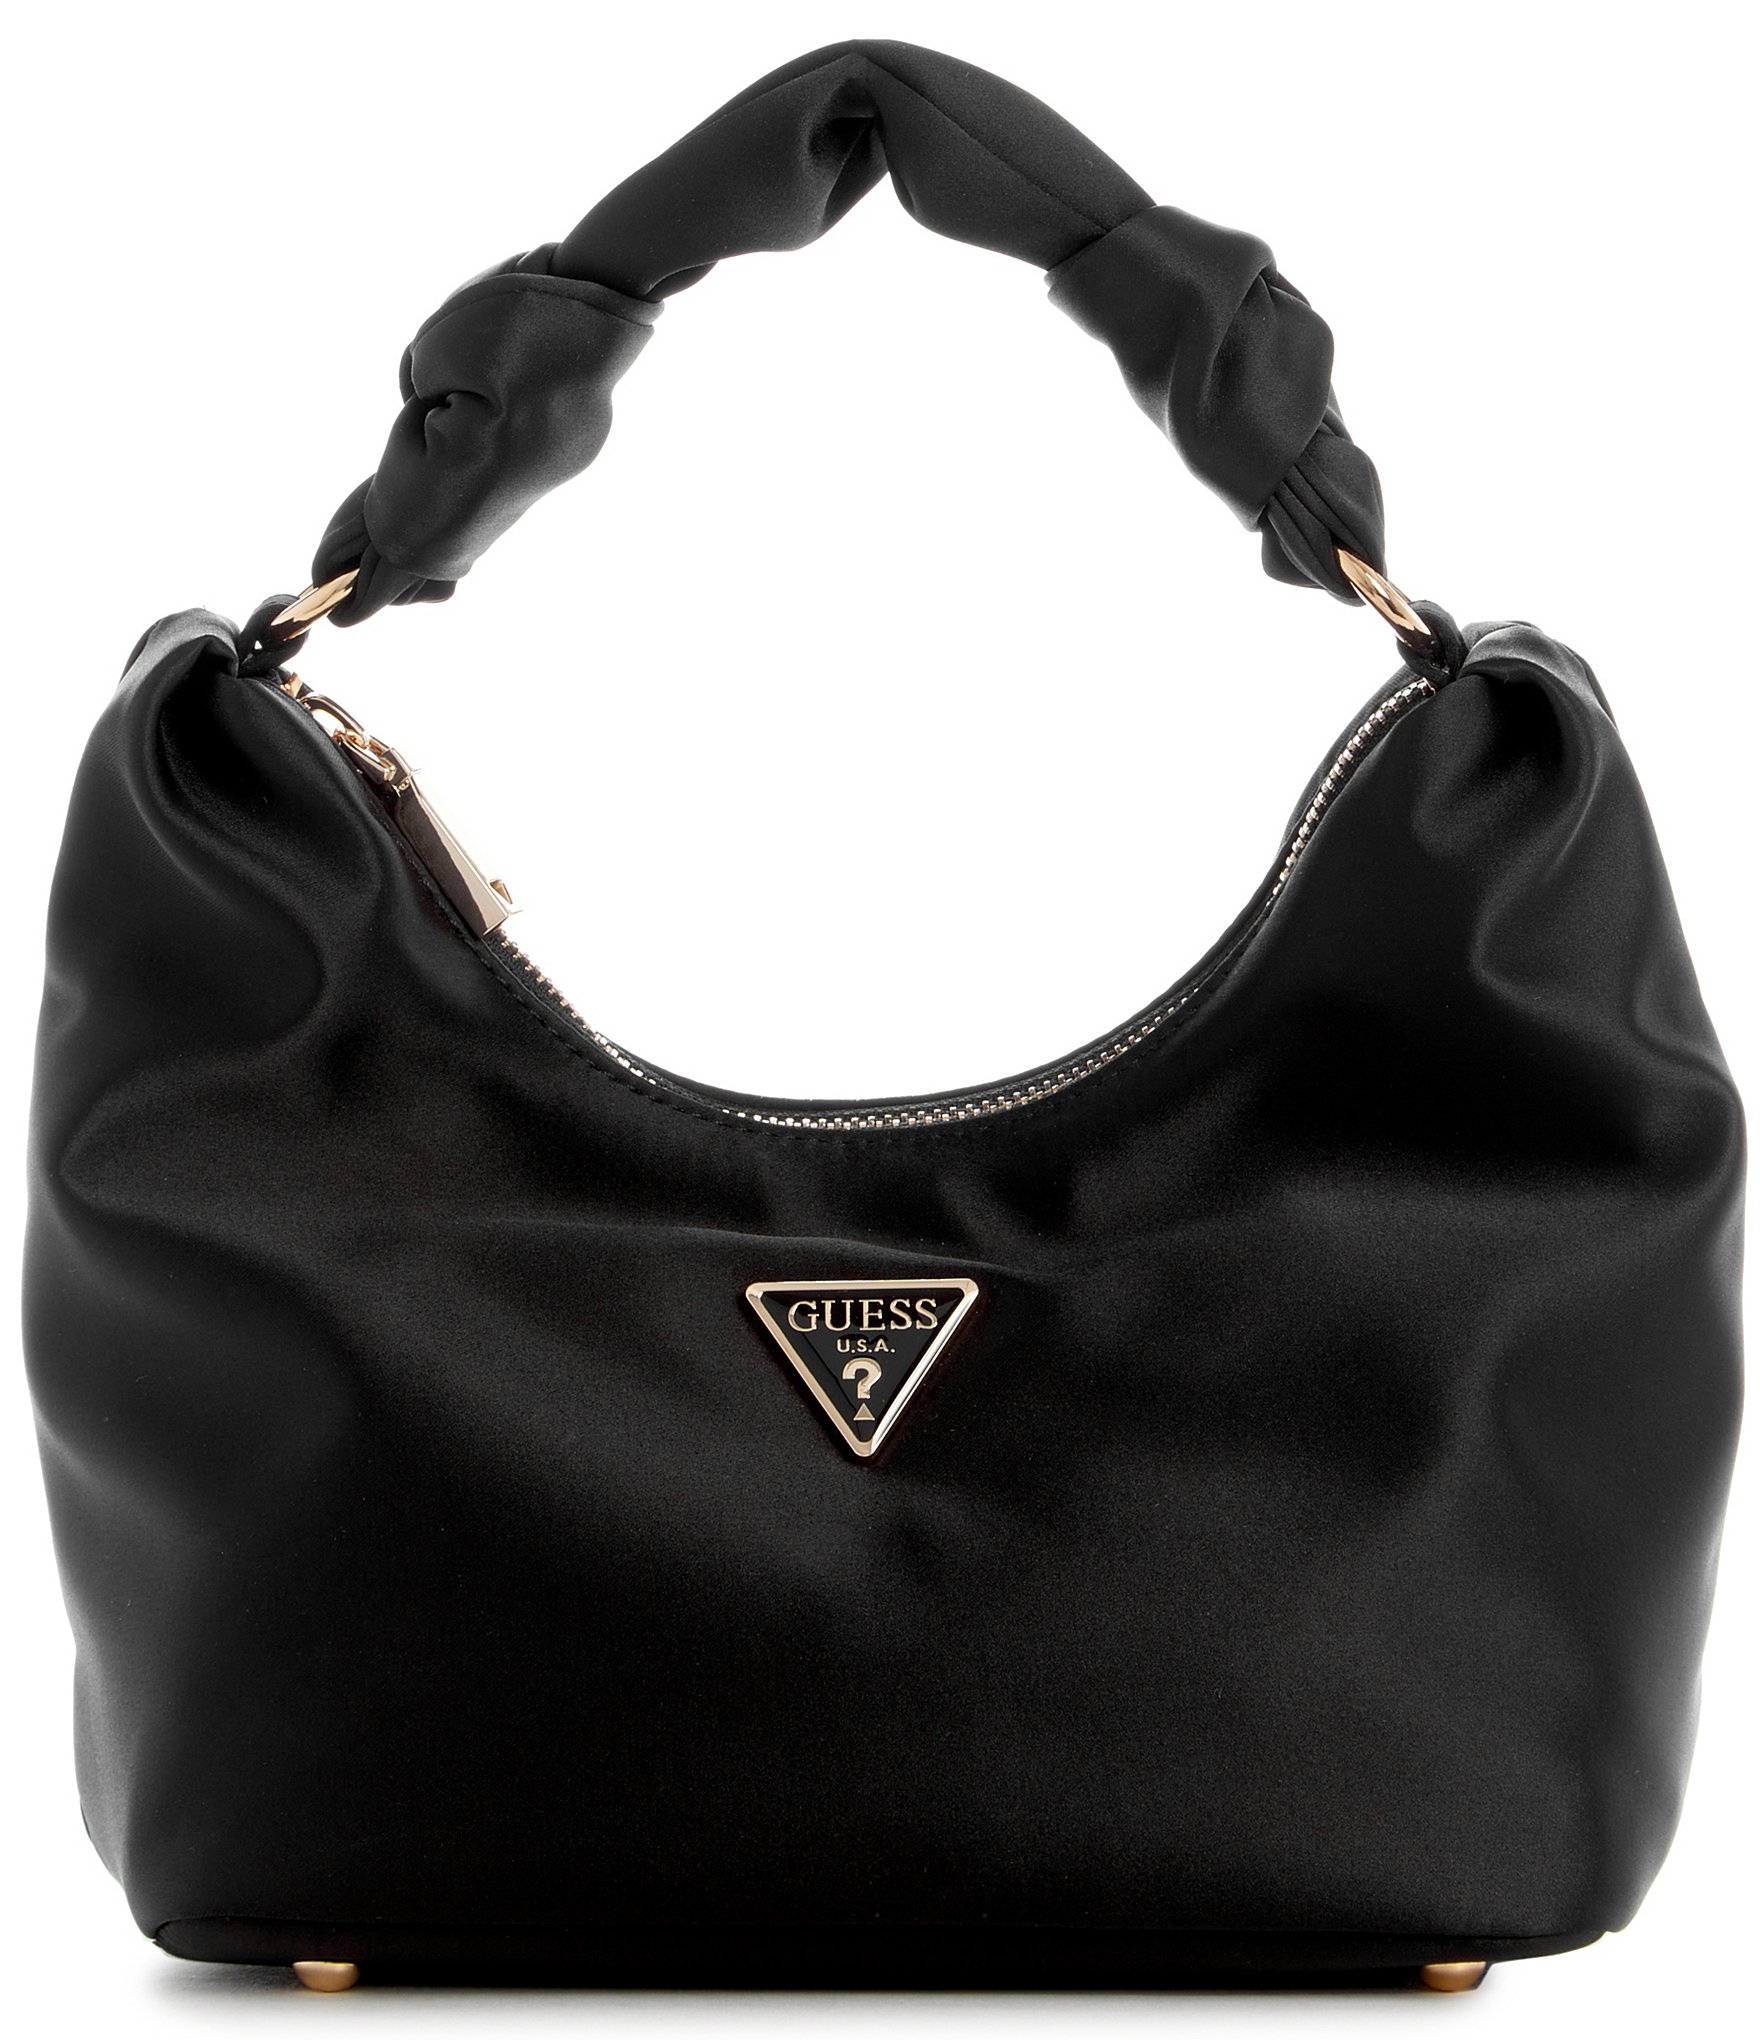 Guess Abey Small Hobo Bag in Black